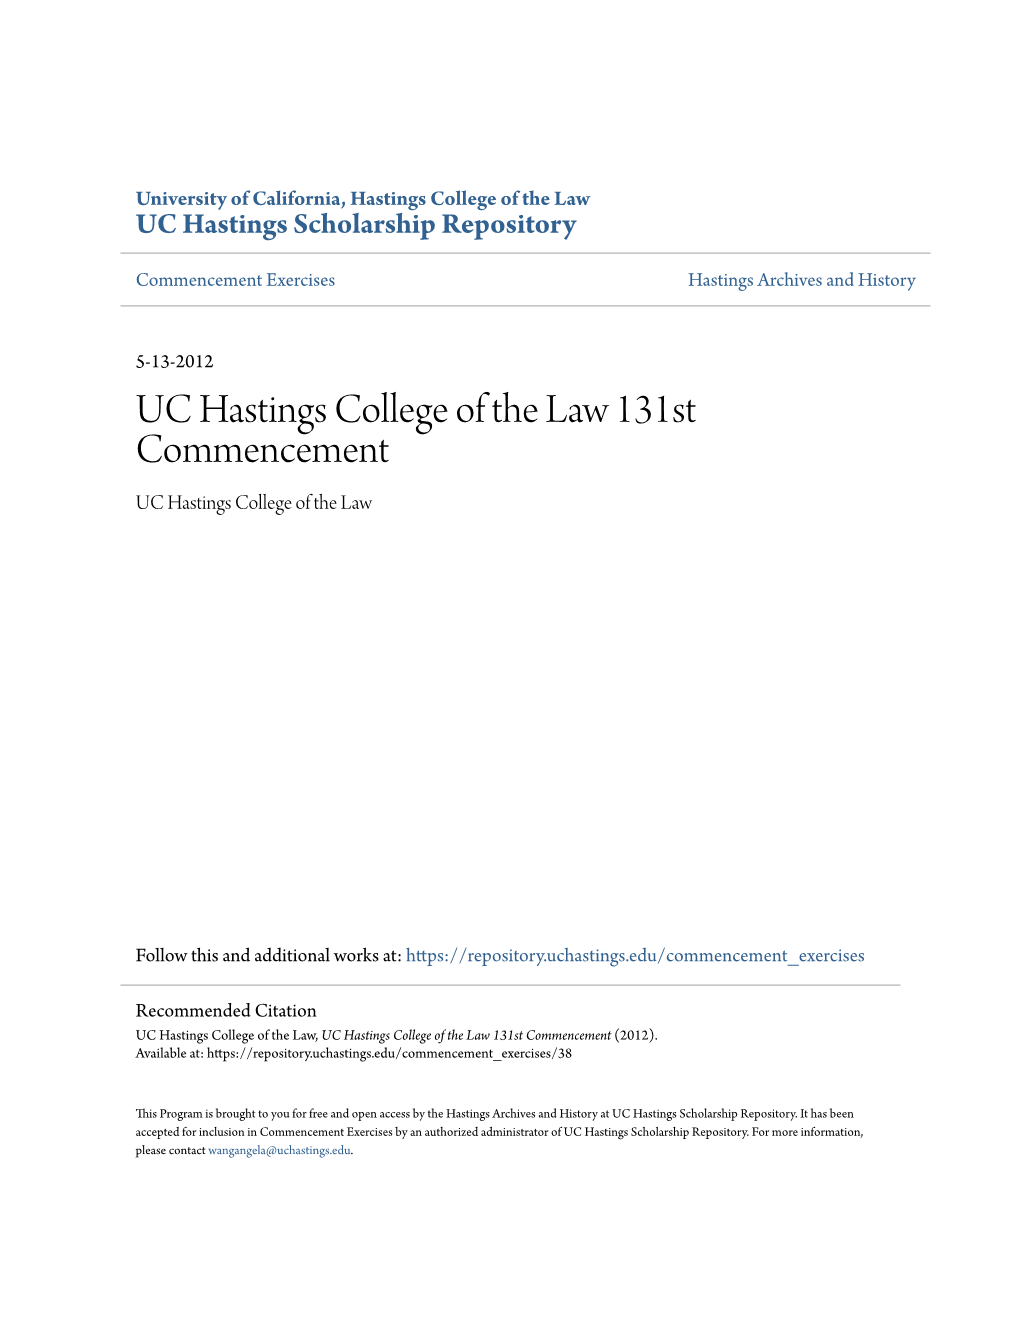 UC Hastings College of the Law 131St Commencement UC Hastings College of the Law